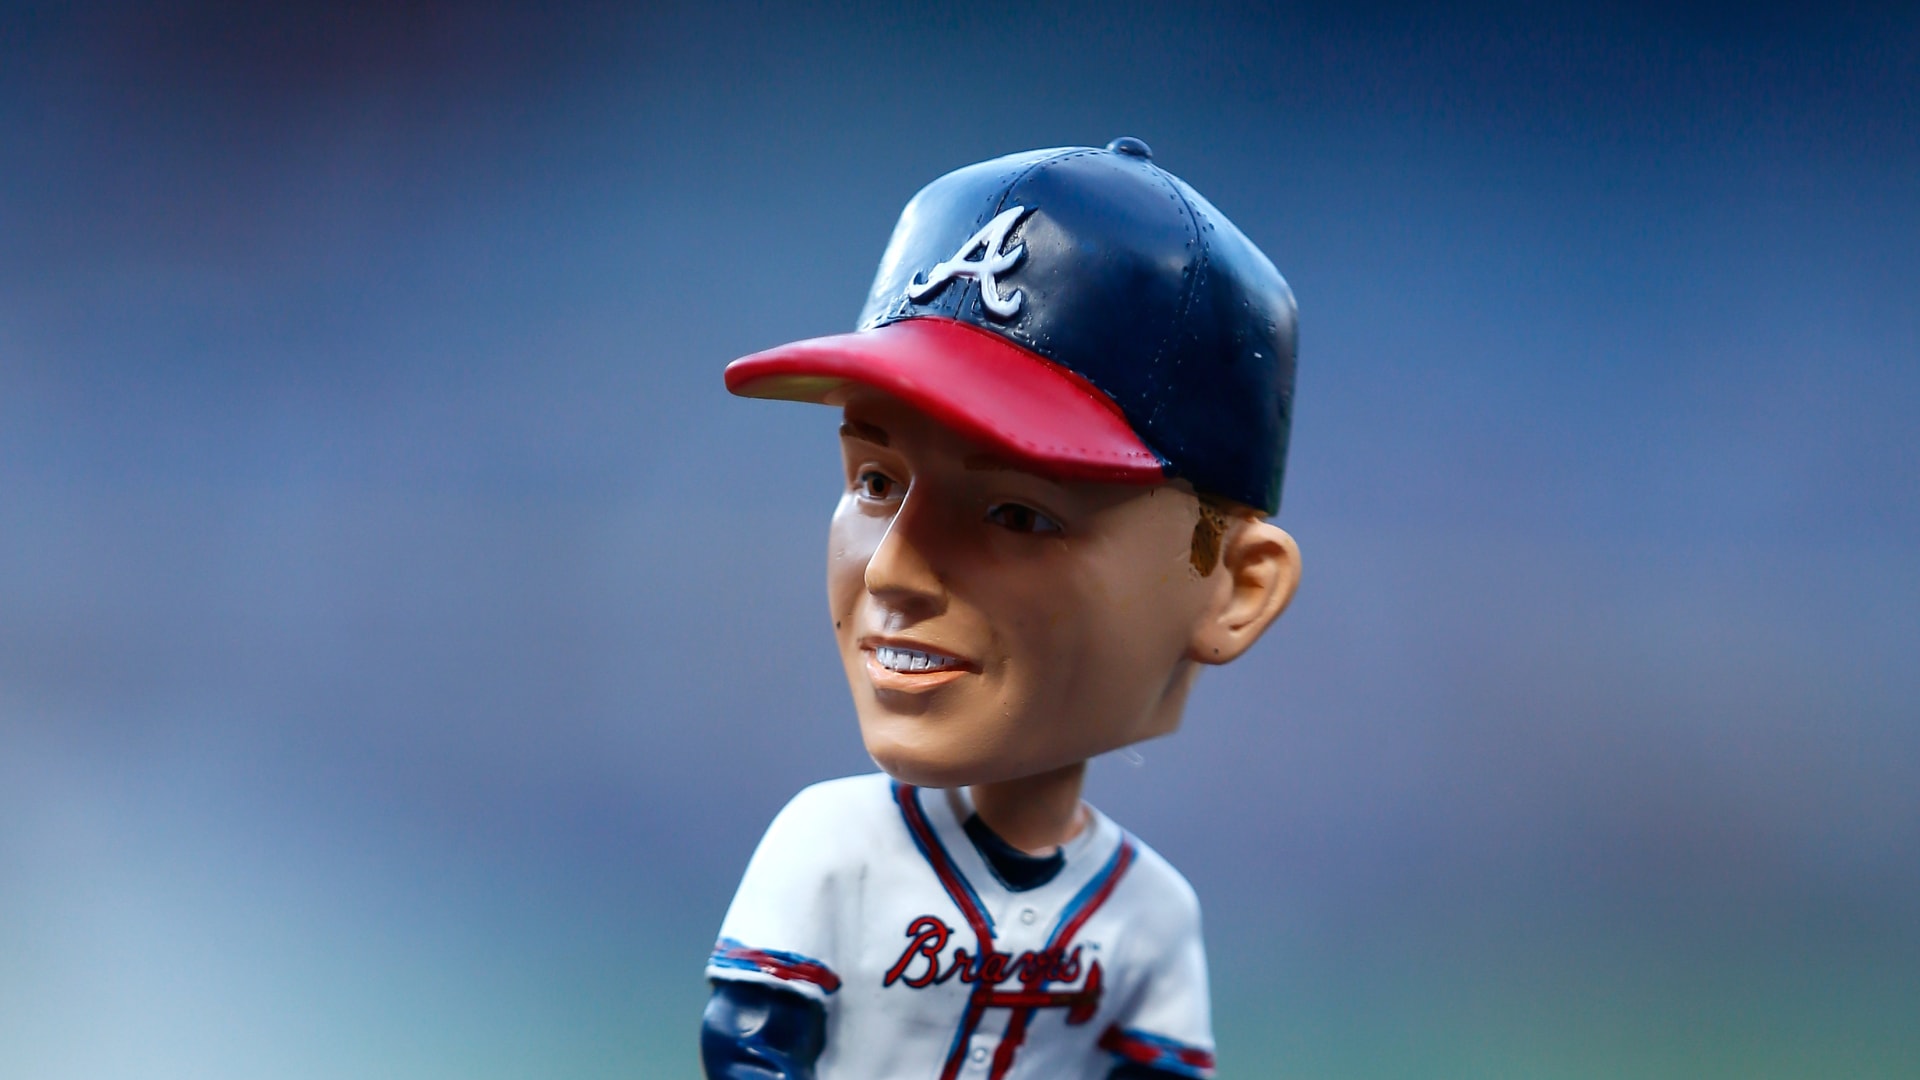 Atlanta Braves announce 7 awesome bobblehead giveaways for 2018!